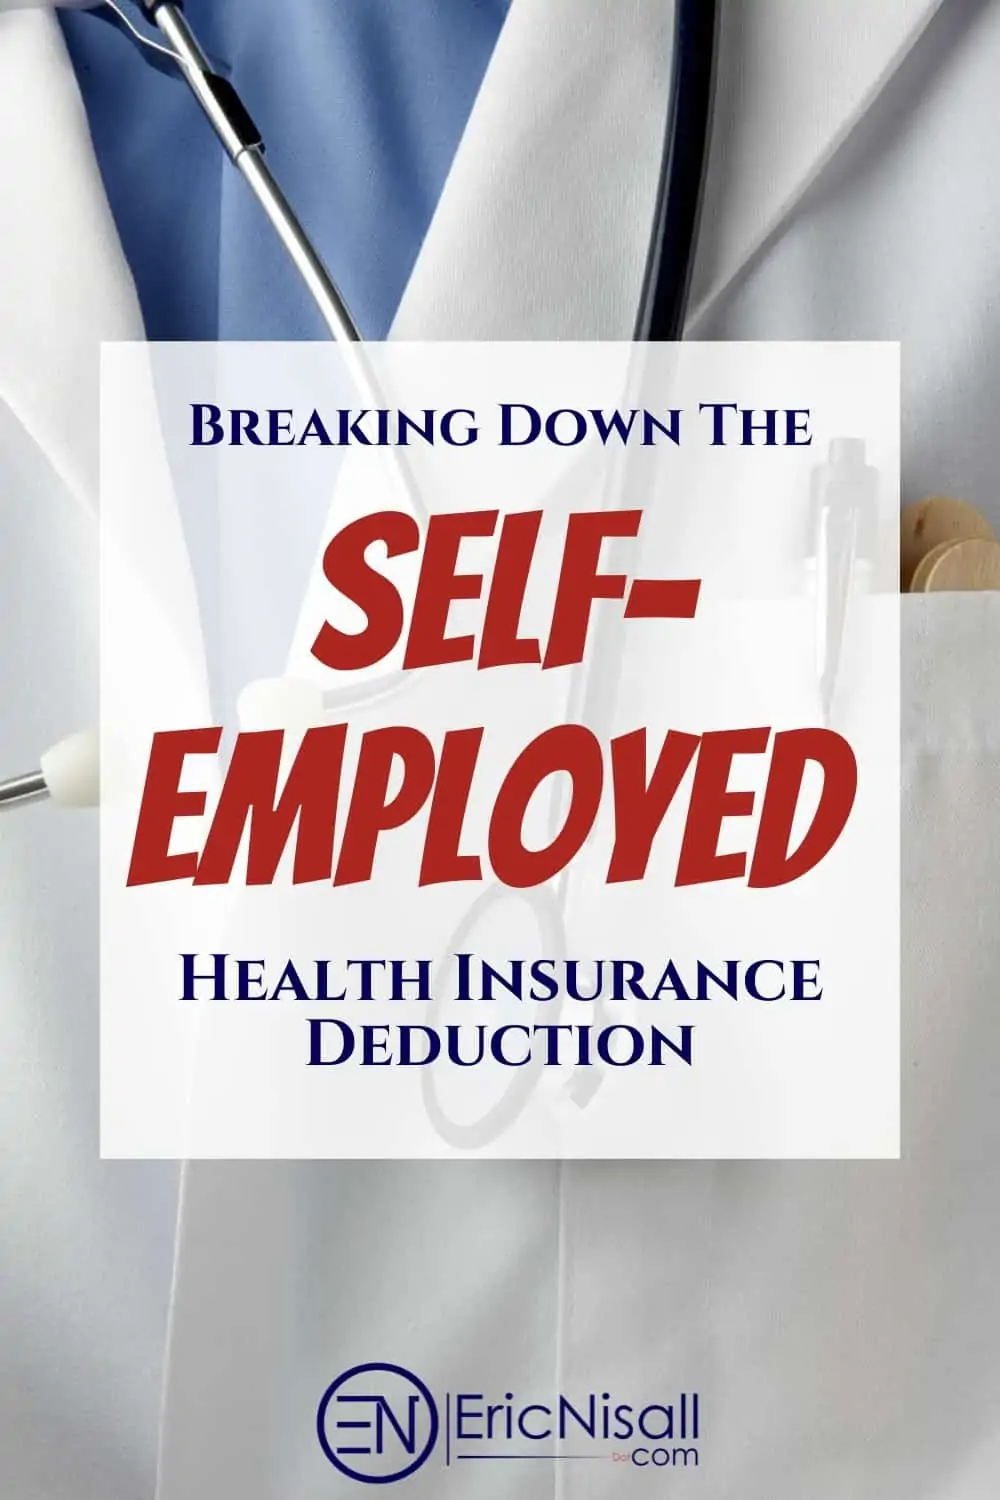 Health insurance is confusing as all get-out! It's worse when you're self-employed. And if you're married...Fuggedaboutit! The info here will help make the self-employed health insurance deduction more understandable. Just click through to the article and get your head wrapped around it like a champ! #healthinsurance #healthcare #selfcare #taxdeductions #smallbusiness #wellness #health via @ericnisall